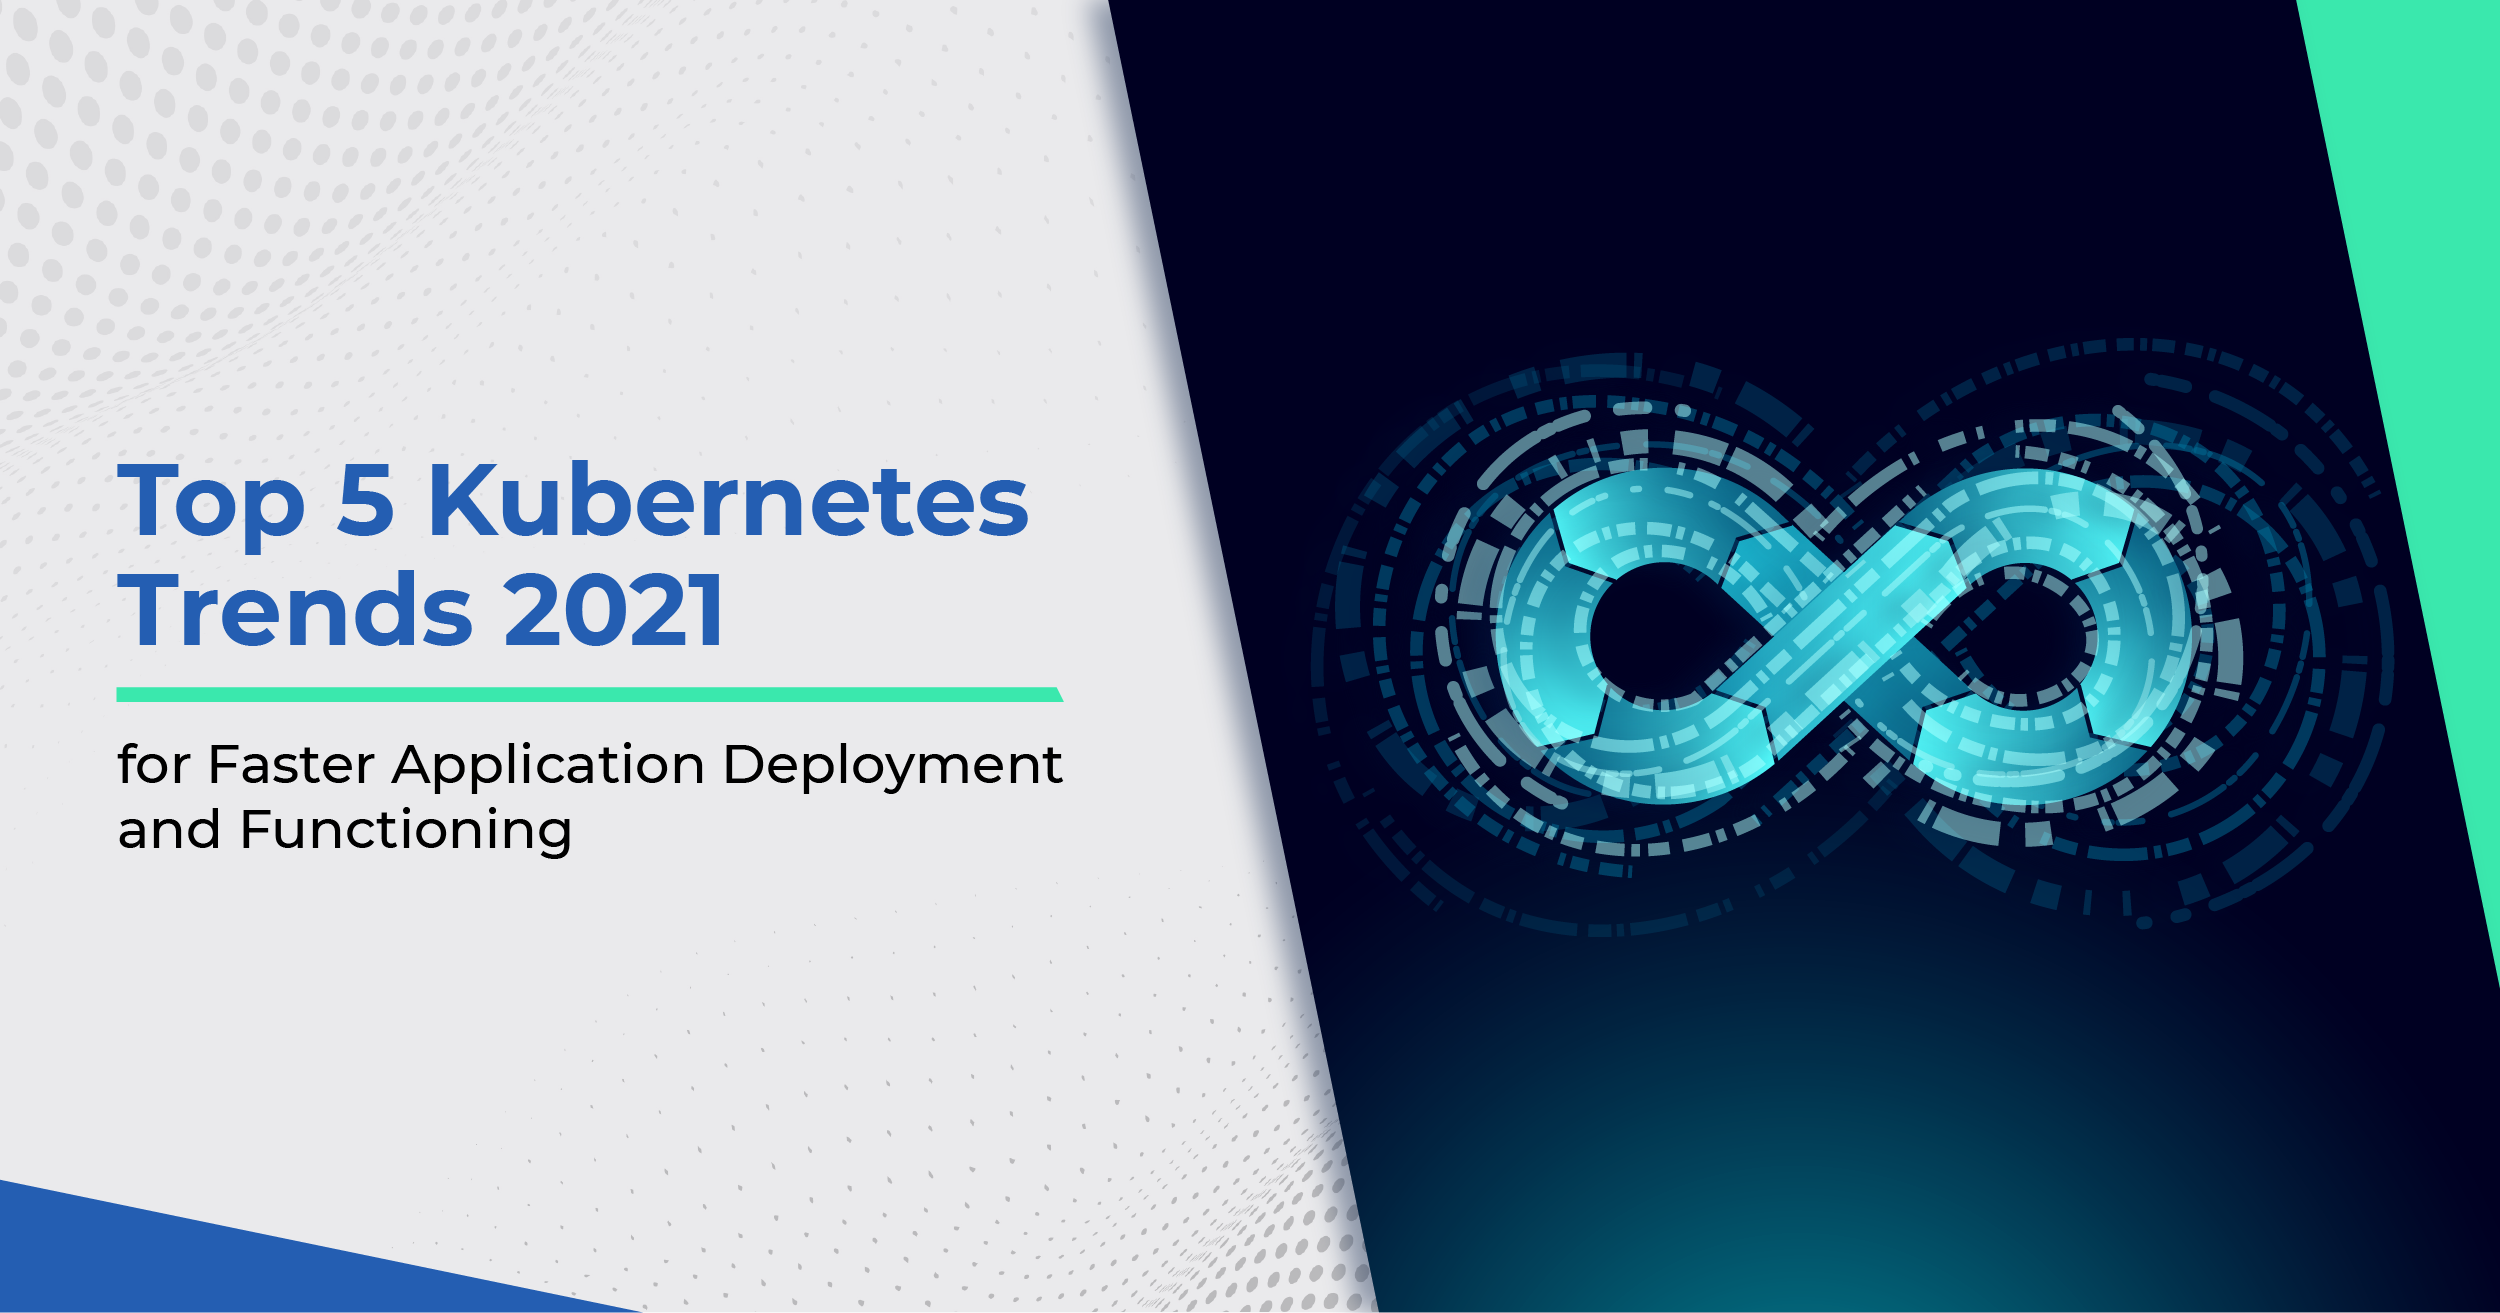 Top 5 Kubernetes Trends 2021 for Faster Application Deployment and Functioning